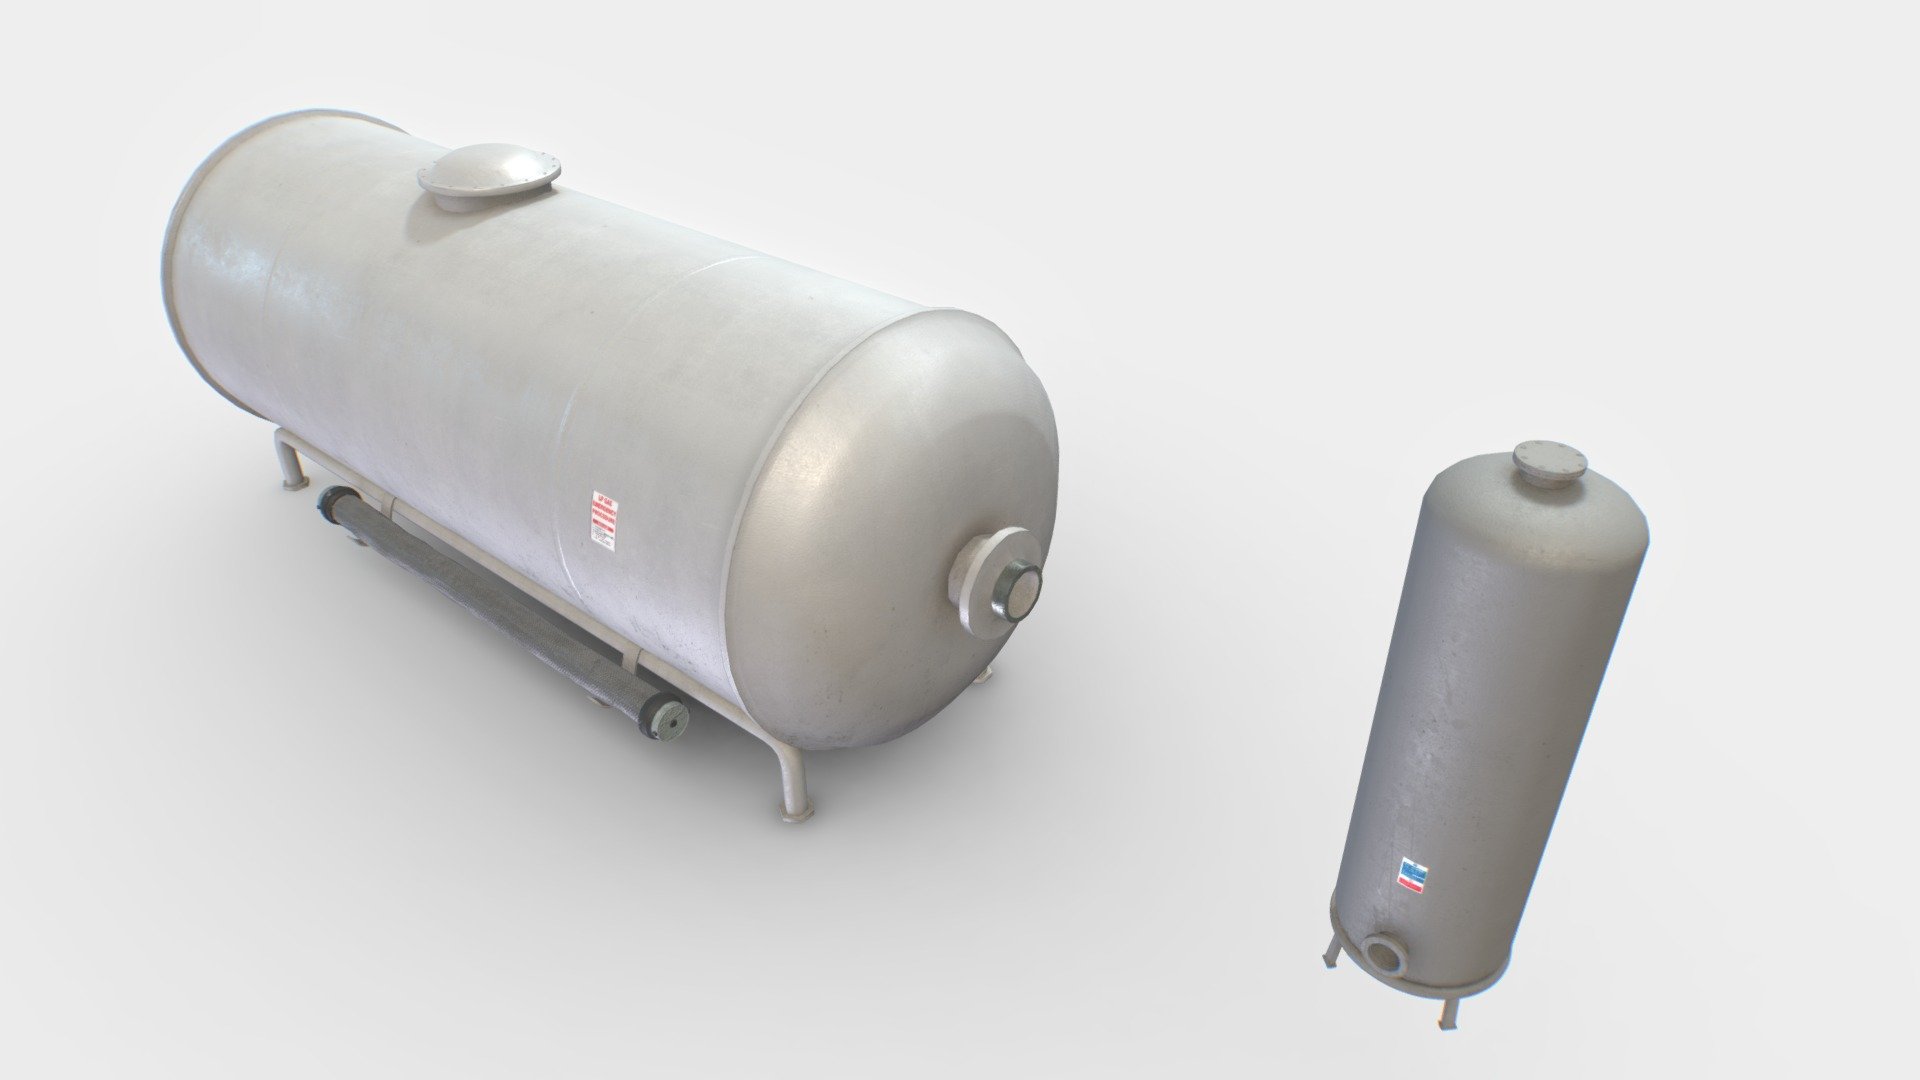 2 industrial tanks of different sizes based in real ones.

Comes with PBR 4096pix textures including Albedo, Normal, Roughness, Metalness, AO.

Suitable for factories, hangars, warehouses, etc..

Realistic scale. For exterior and interiors. Support legs and hose are separate objects in case you want to use the tank alone 3d model